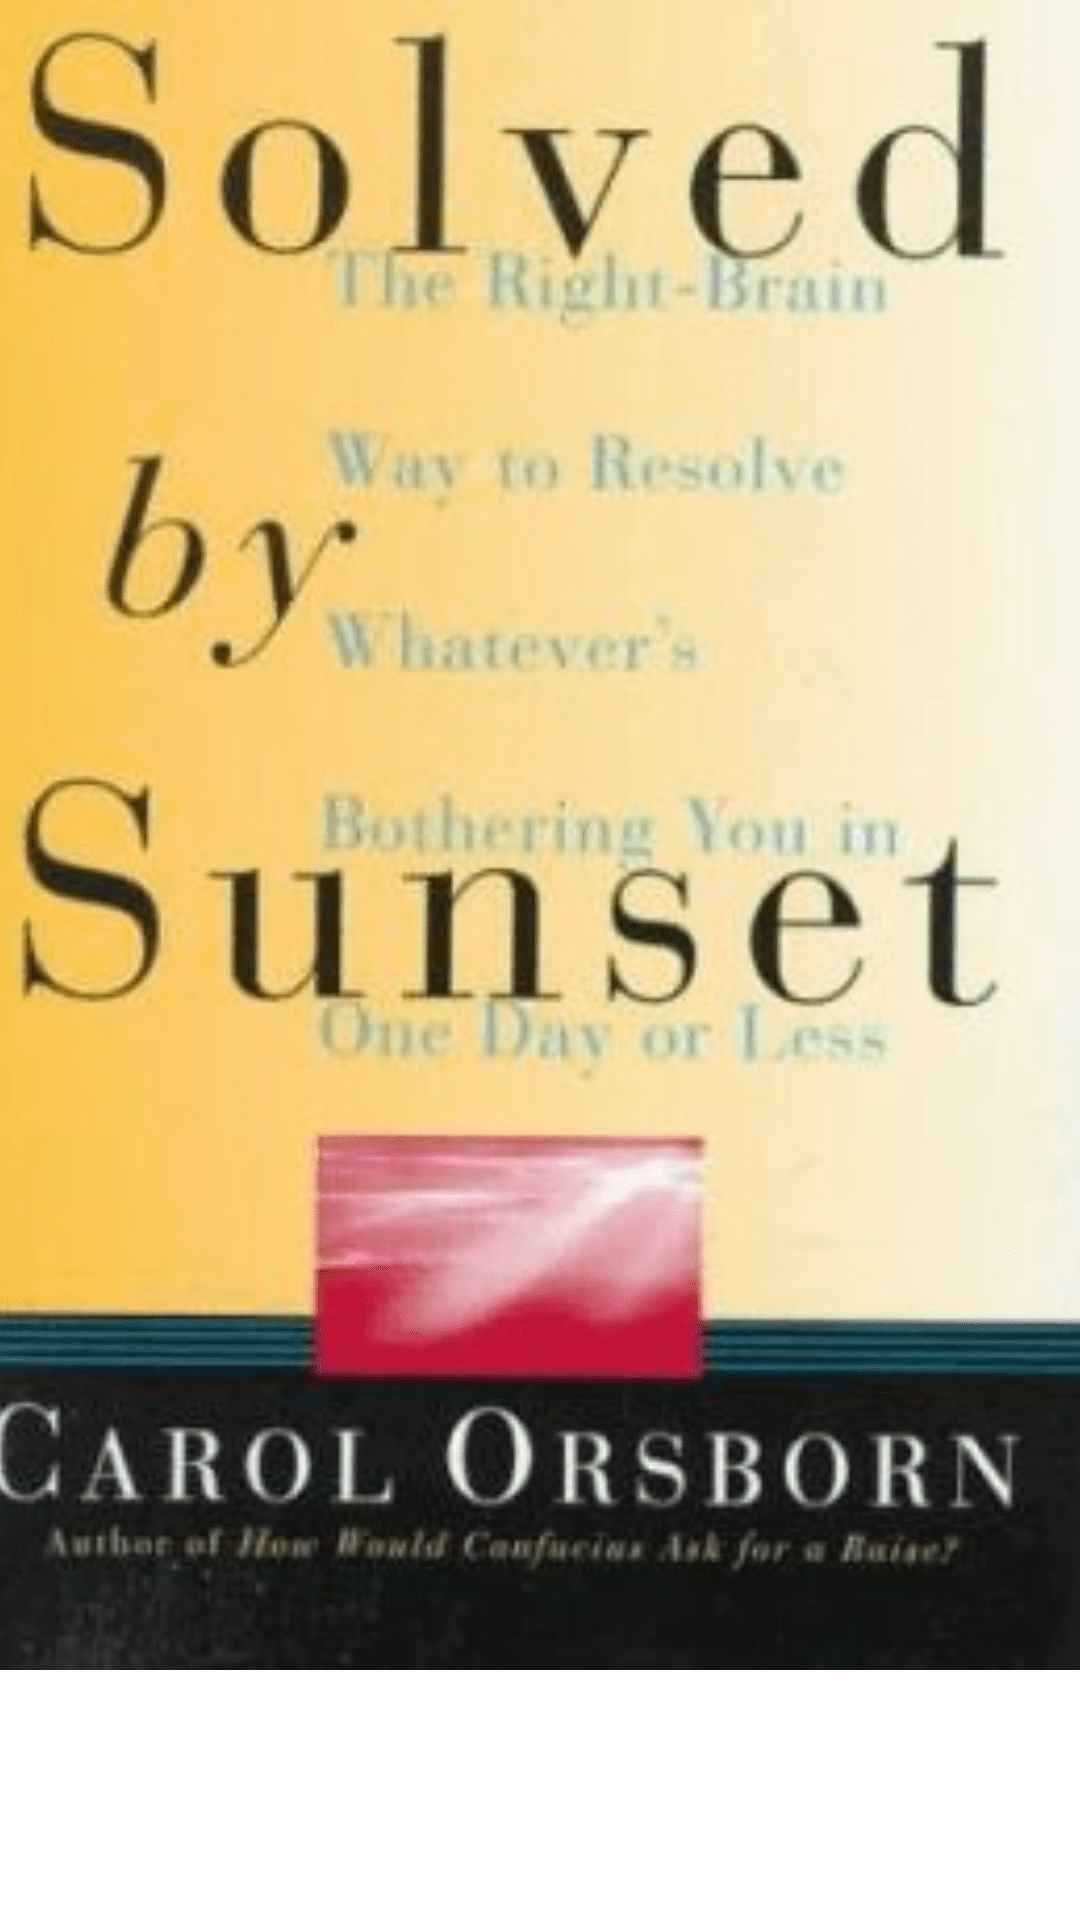 The Solved by Sunset by Carol Orsborn